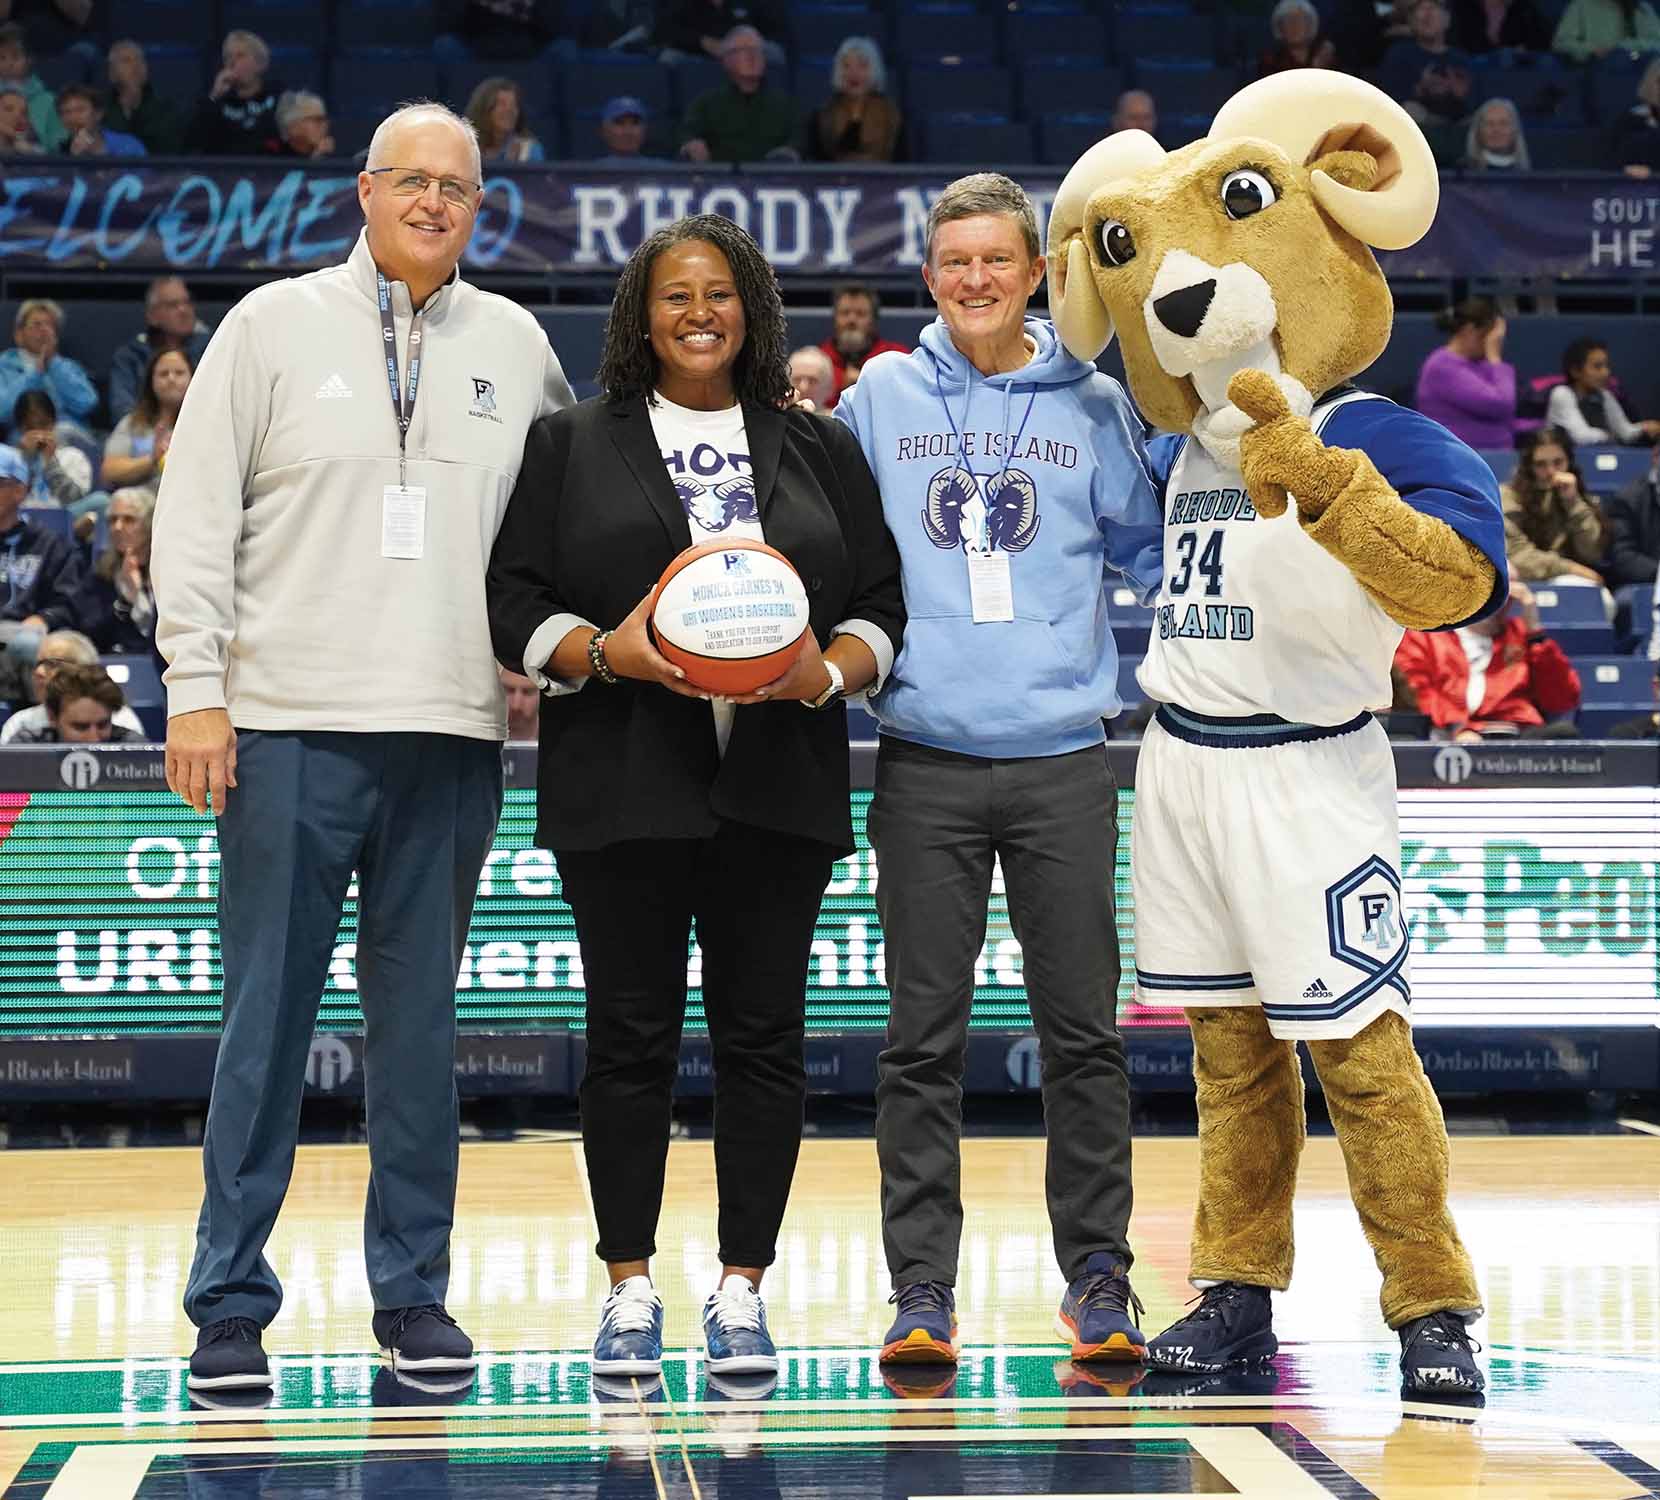 Monica Garnes '94 on the URI basketball court with President Parlange and Rhodey Ram. Monica is holding a URI branded basketball.